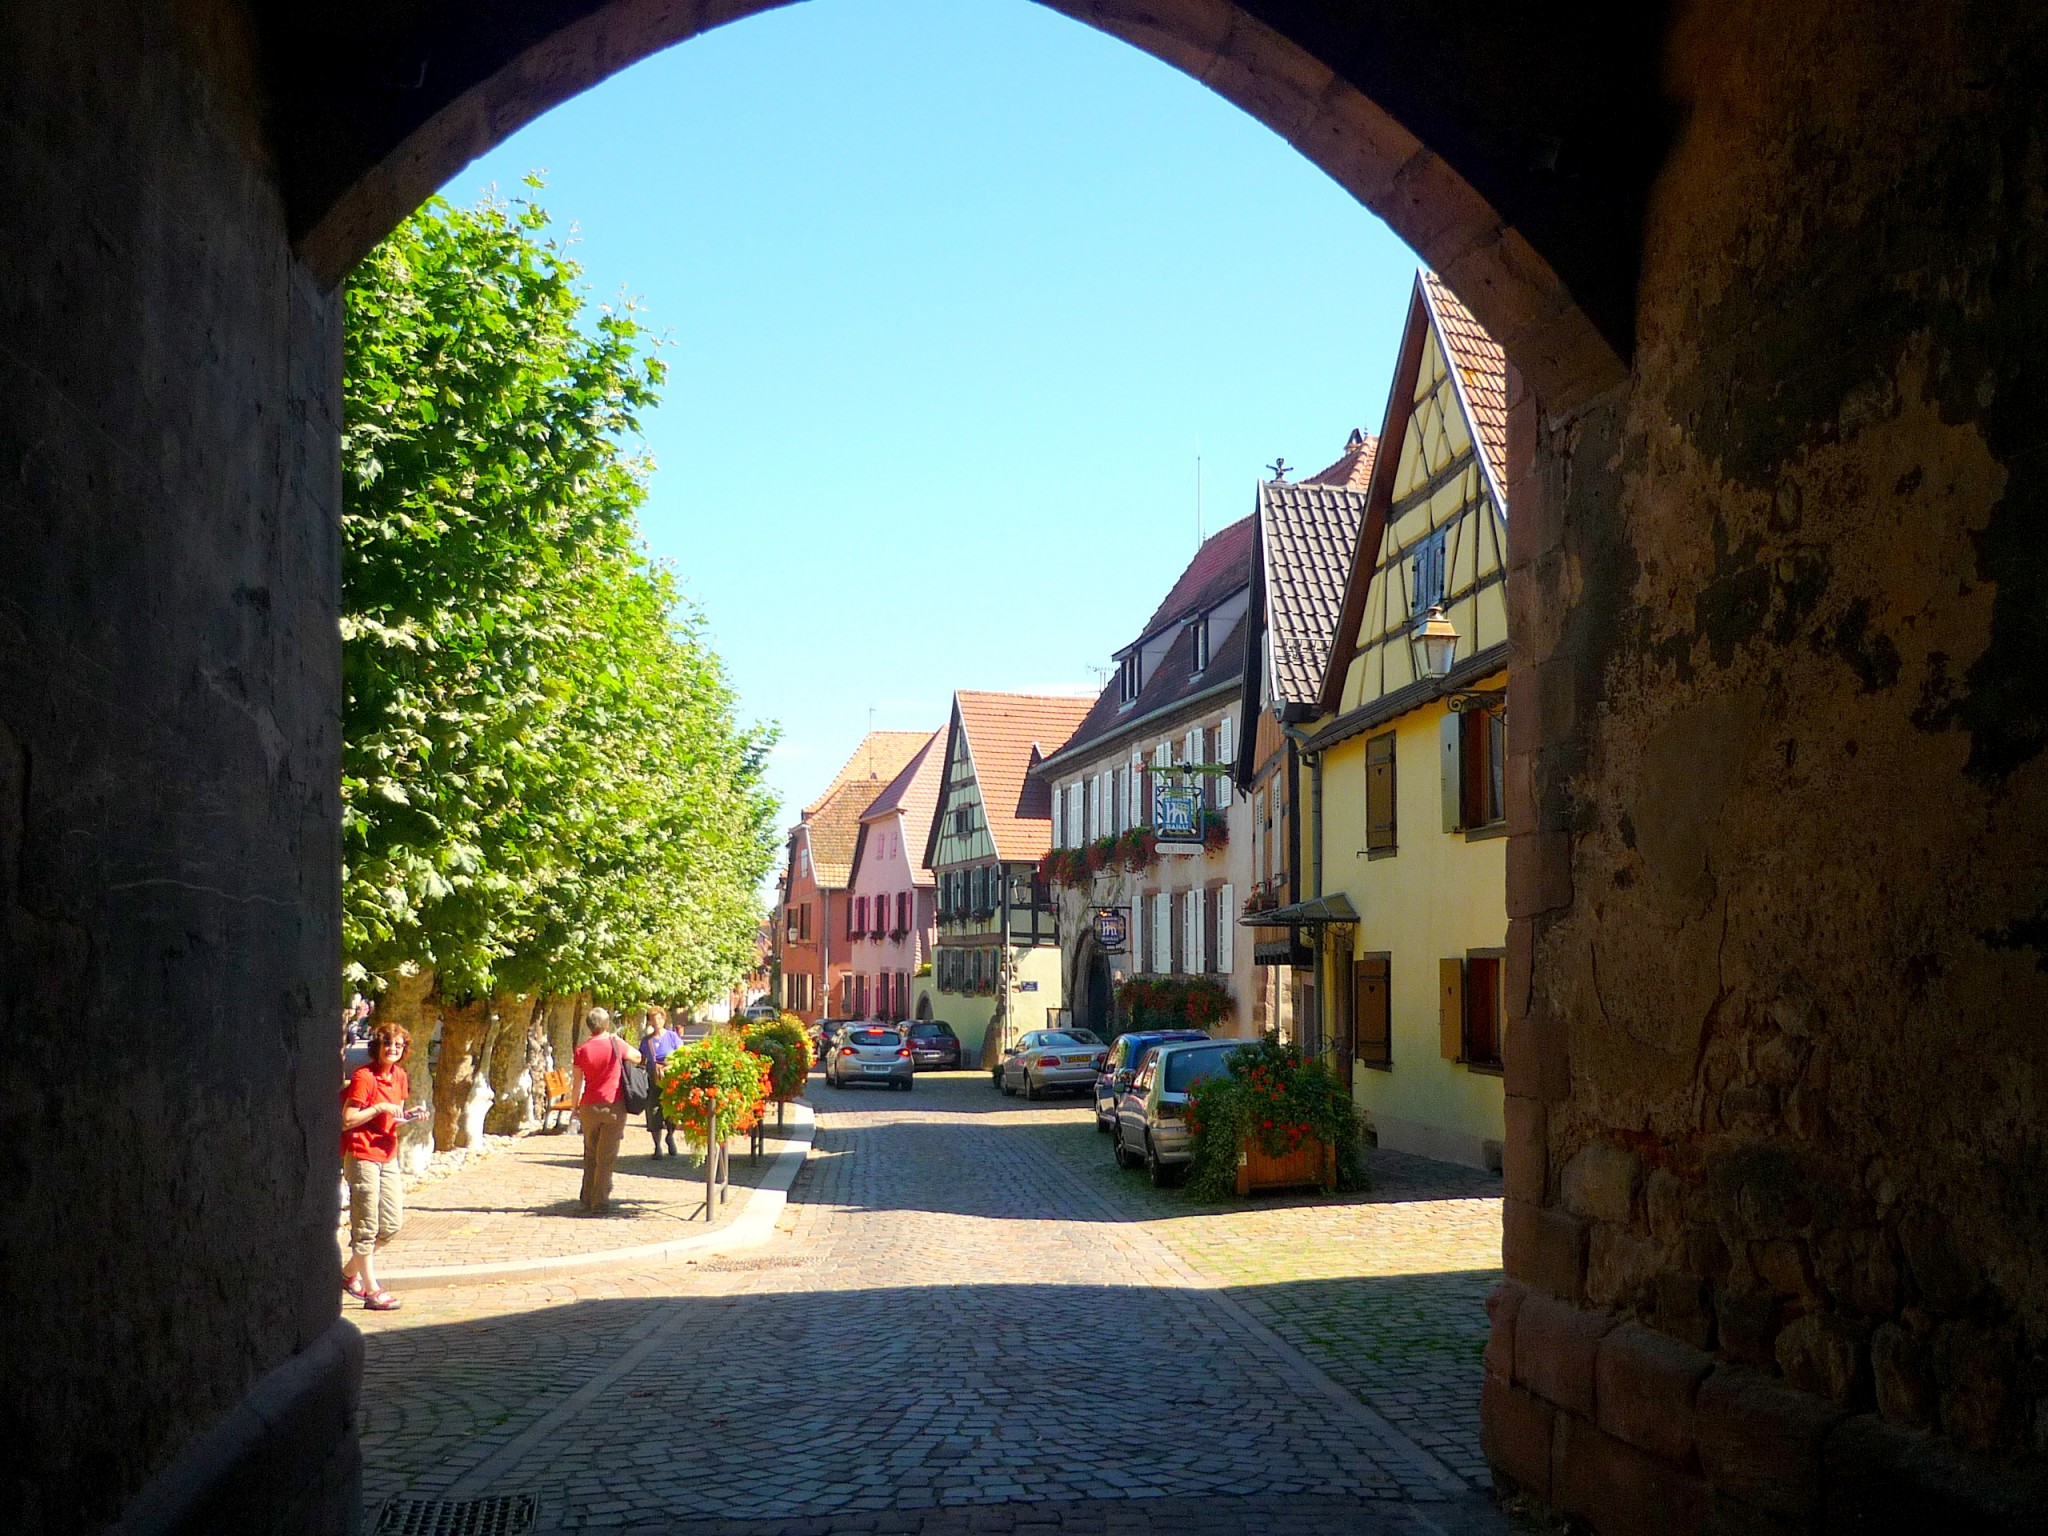 Under the Obertor (Porte Haute) in Bergheim © French Moments